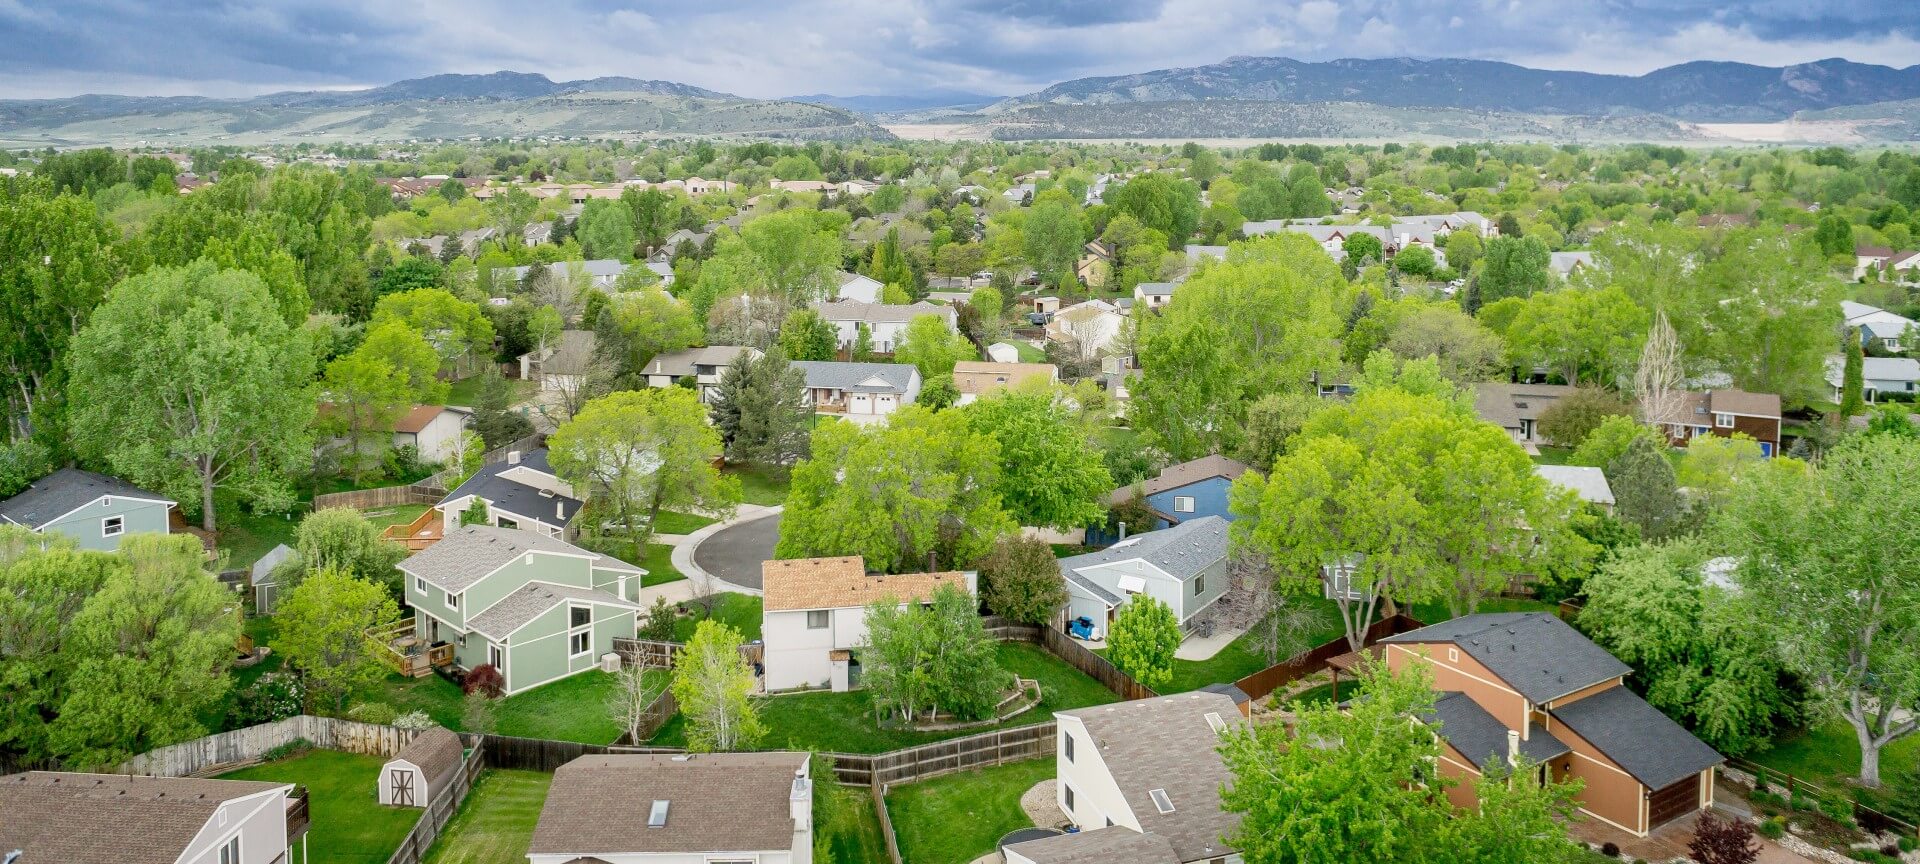 Aerial view of neighborhood with green trees and mountain in background